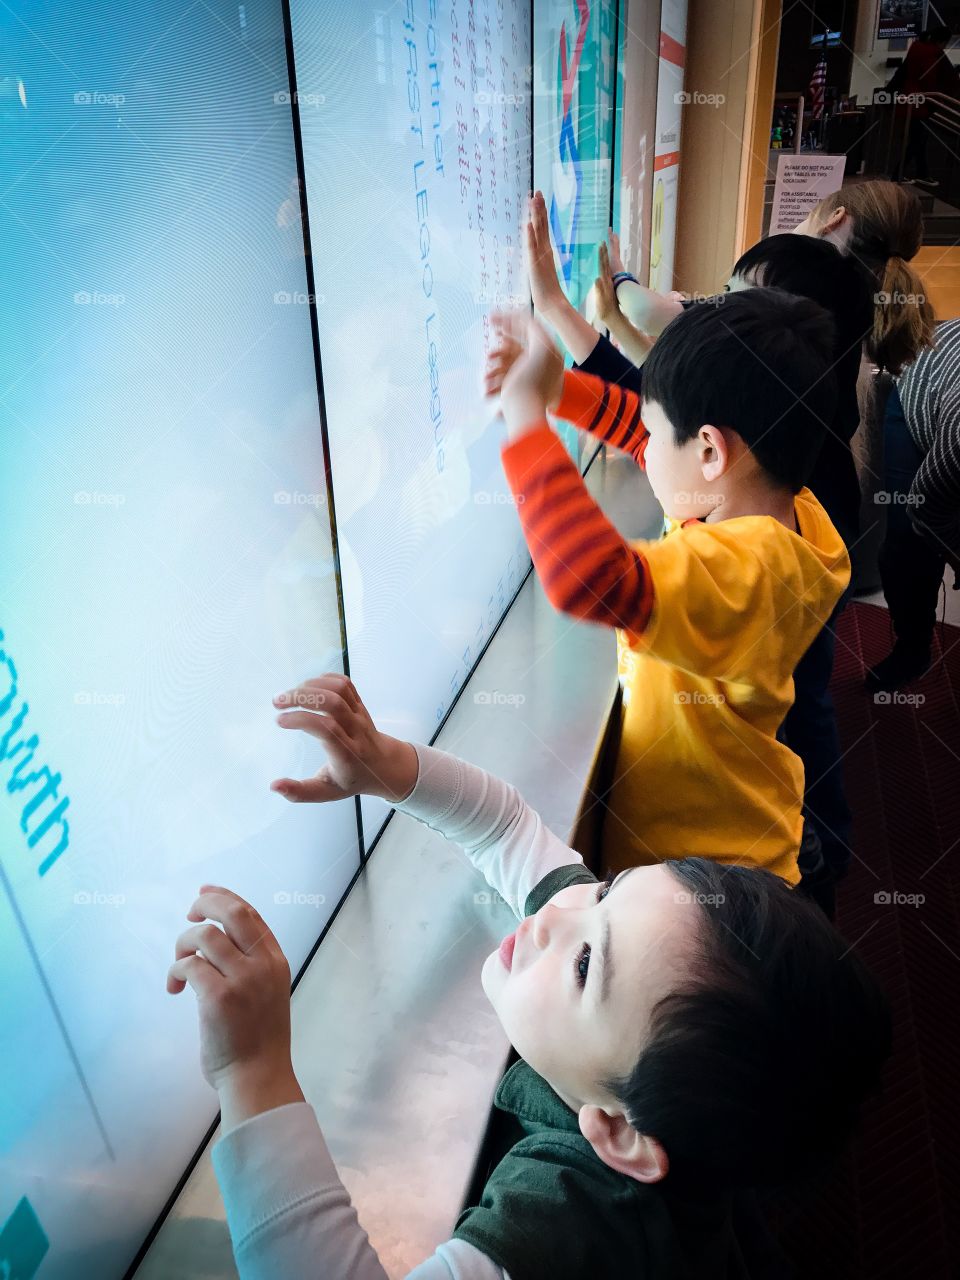 Kids and giant interactive display